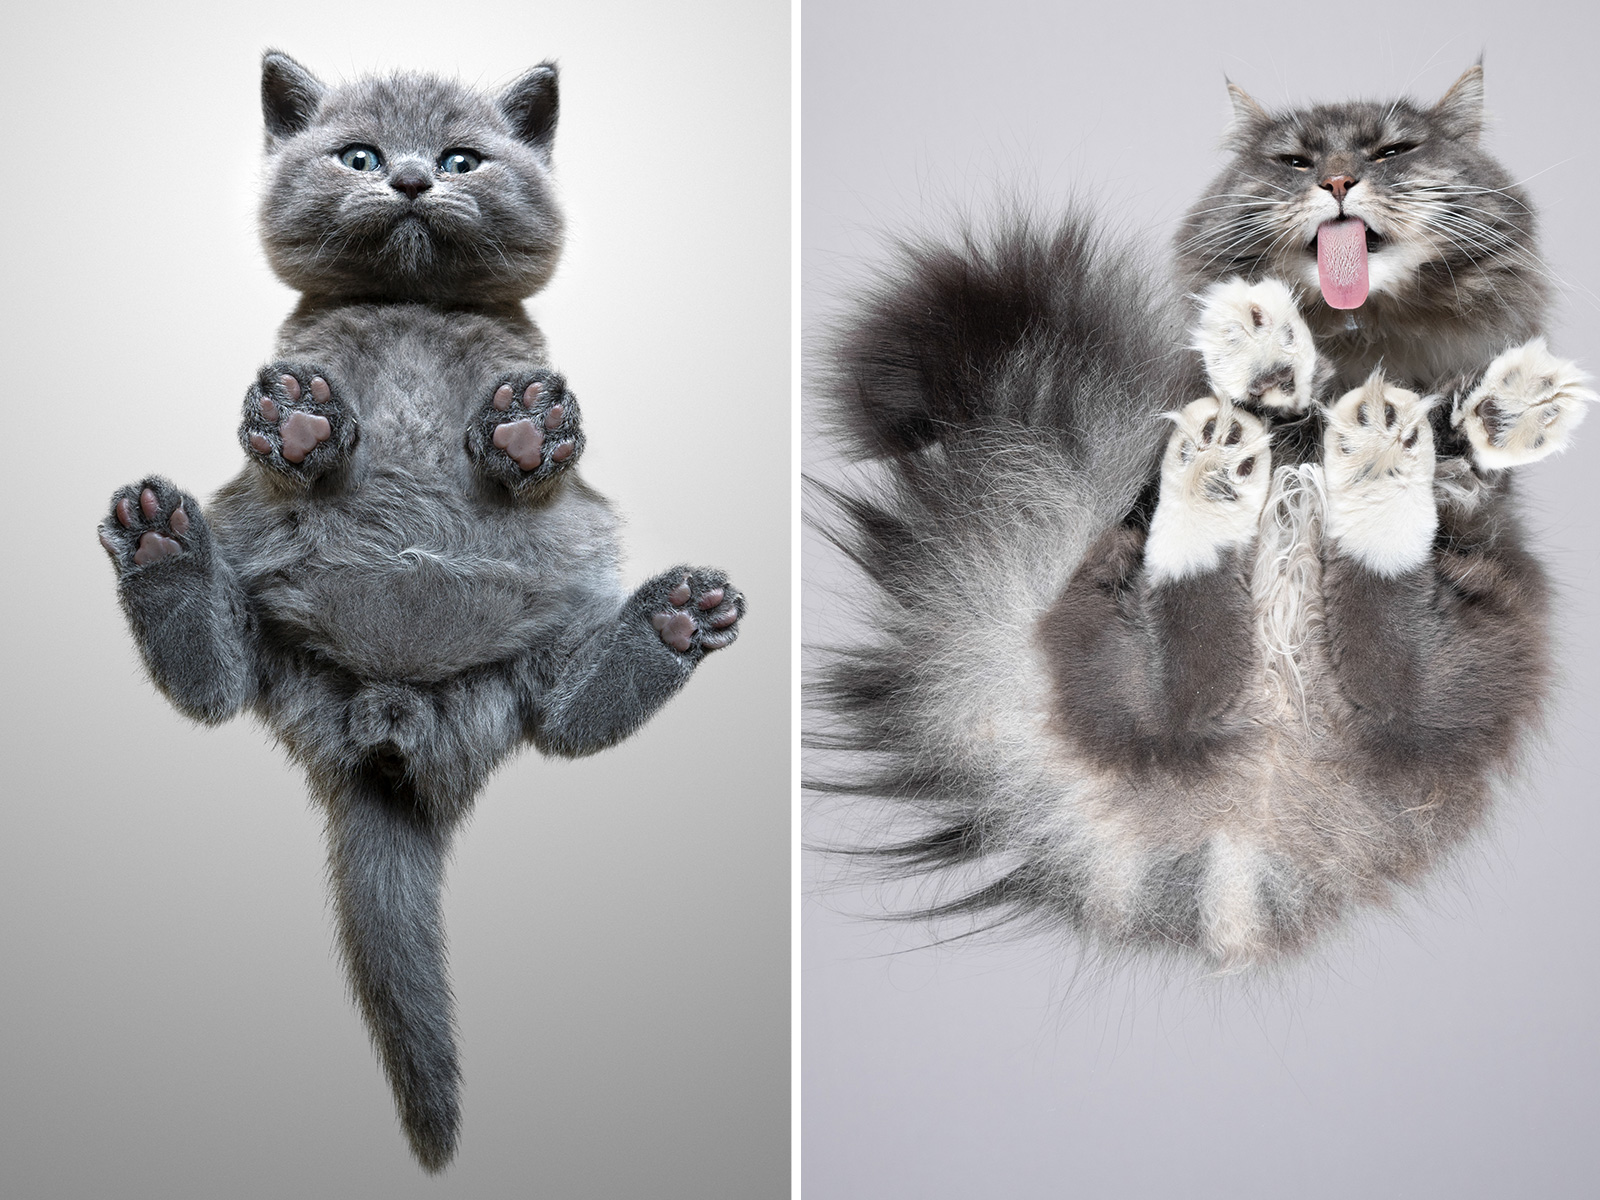 Man Lures Cats Into Photoshoots Using